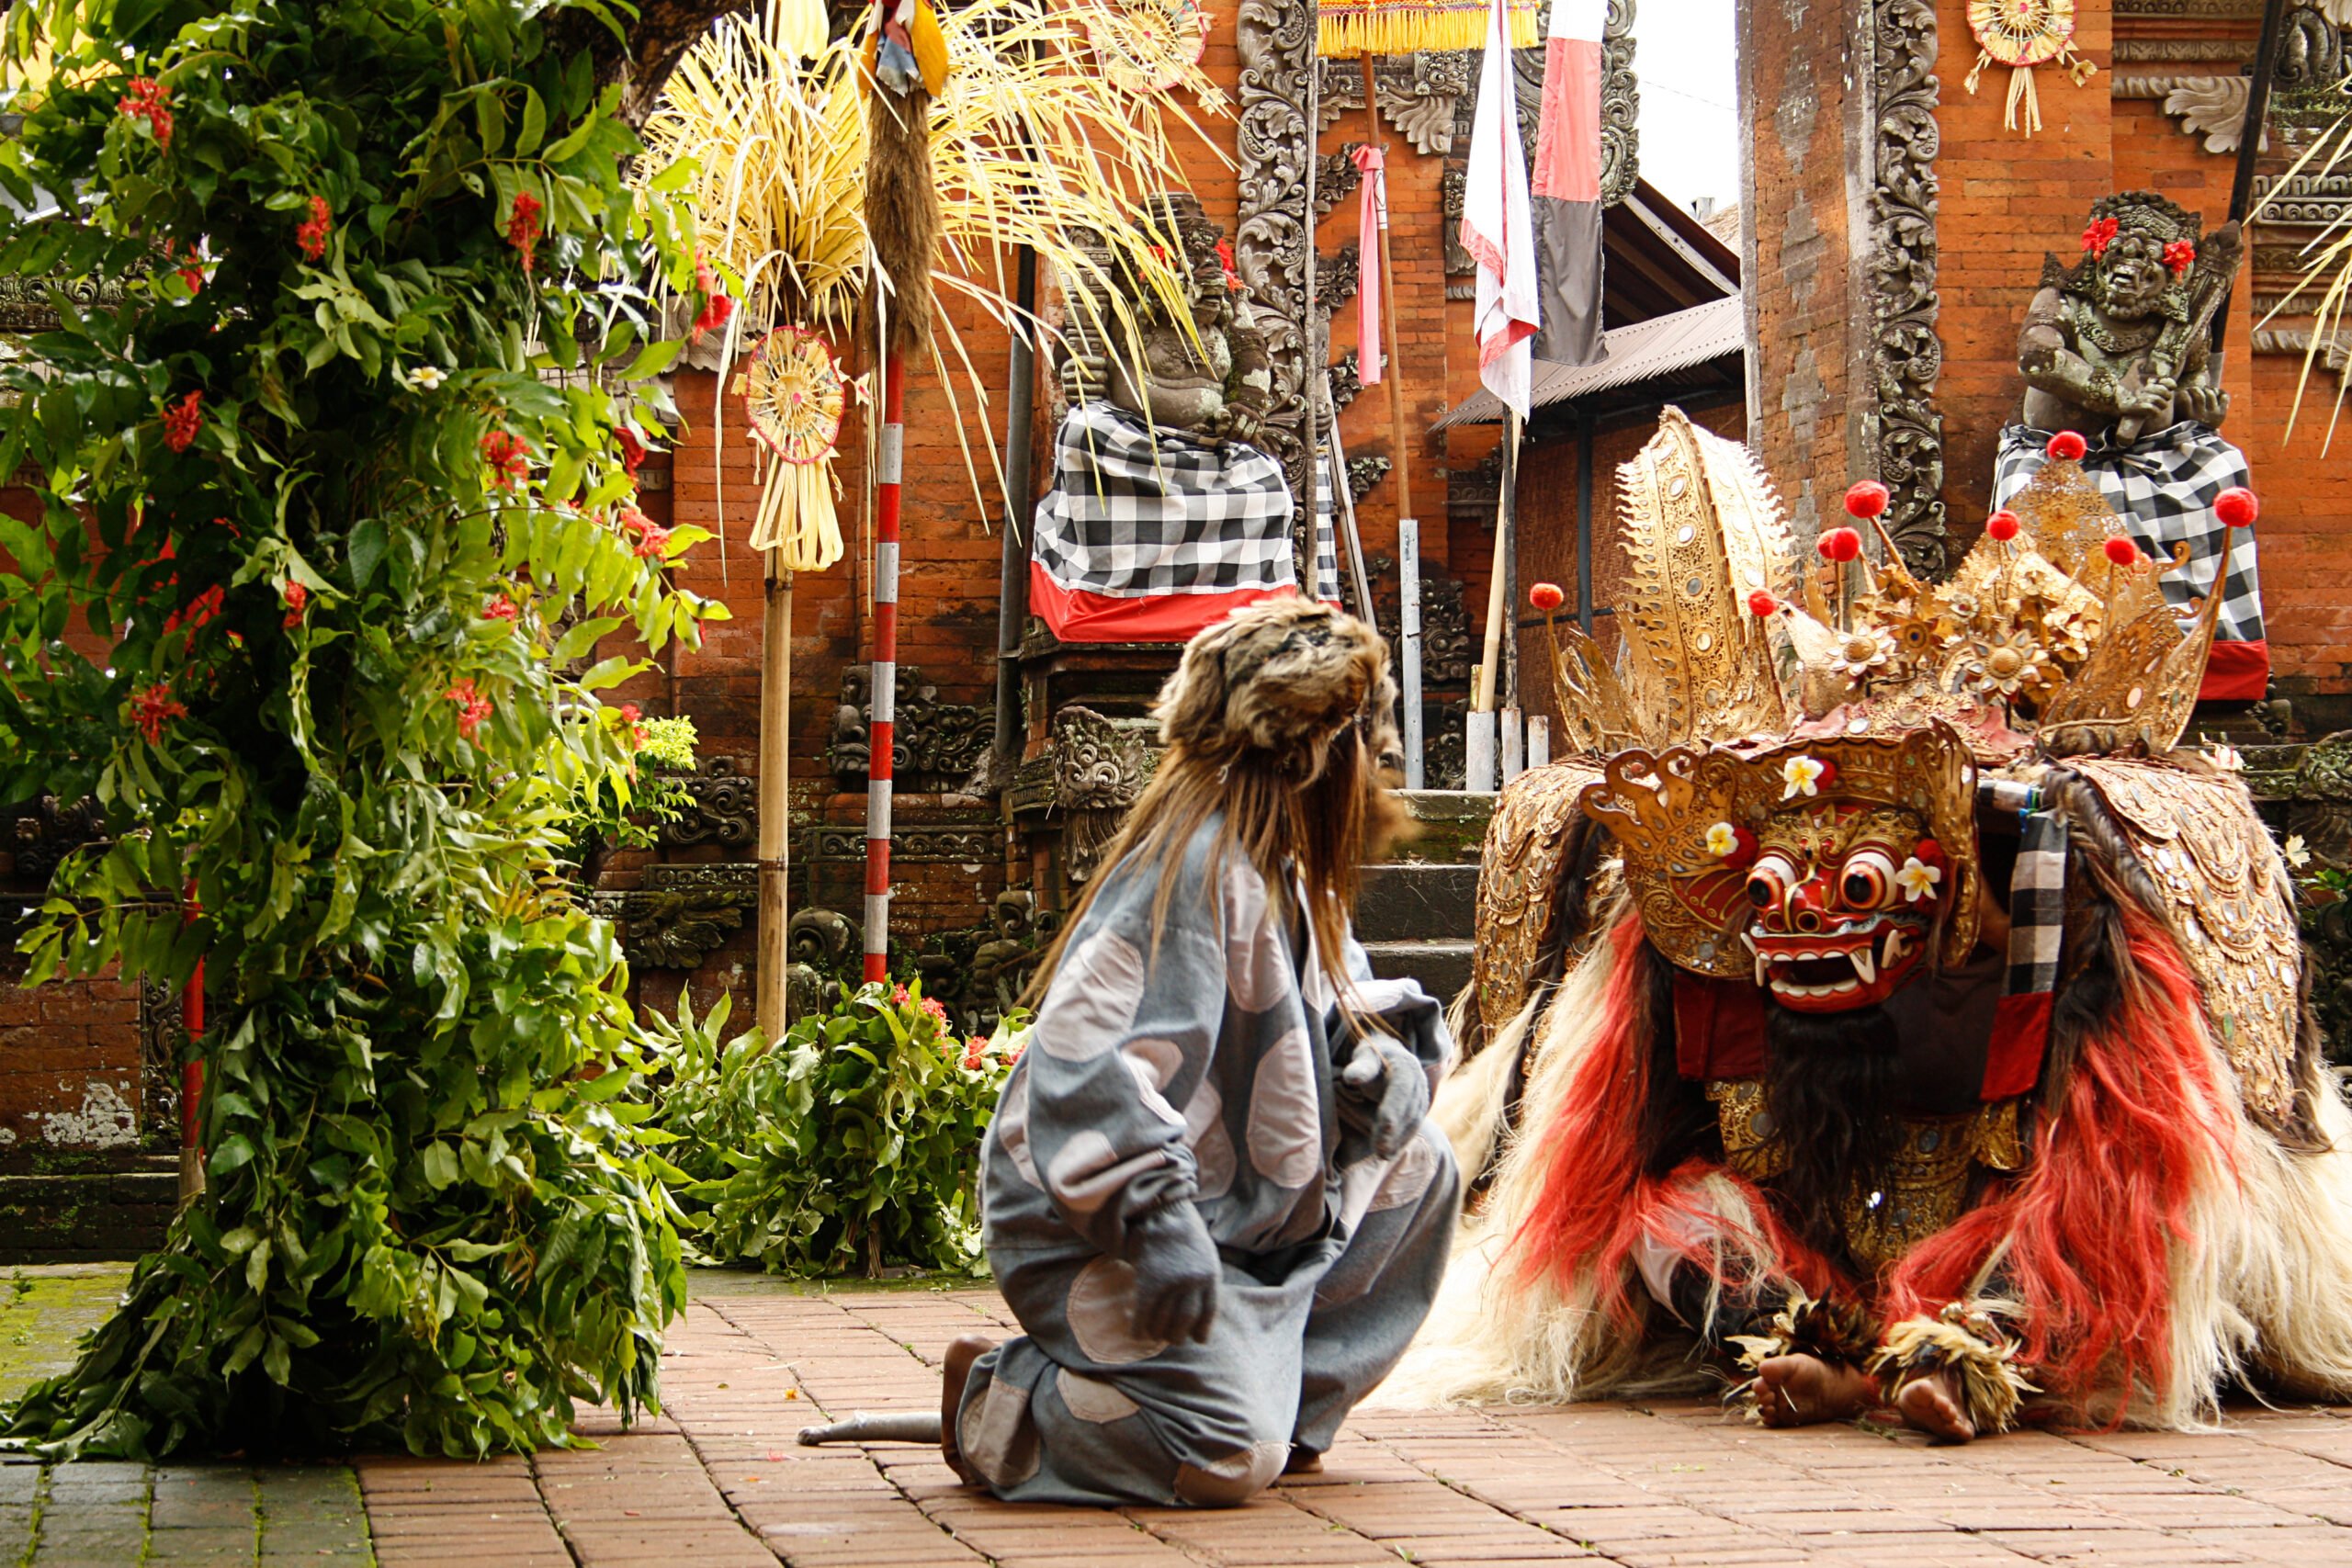 Enjoy A Traditional Barong Dance On The Bali Culture Tour